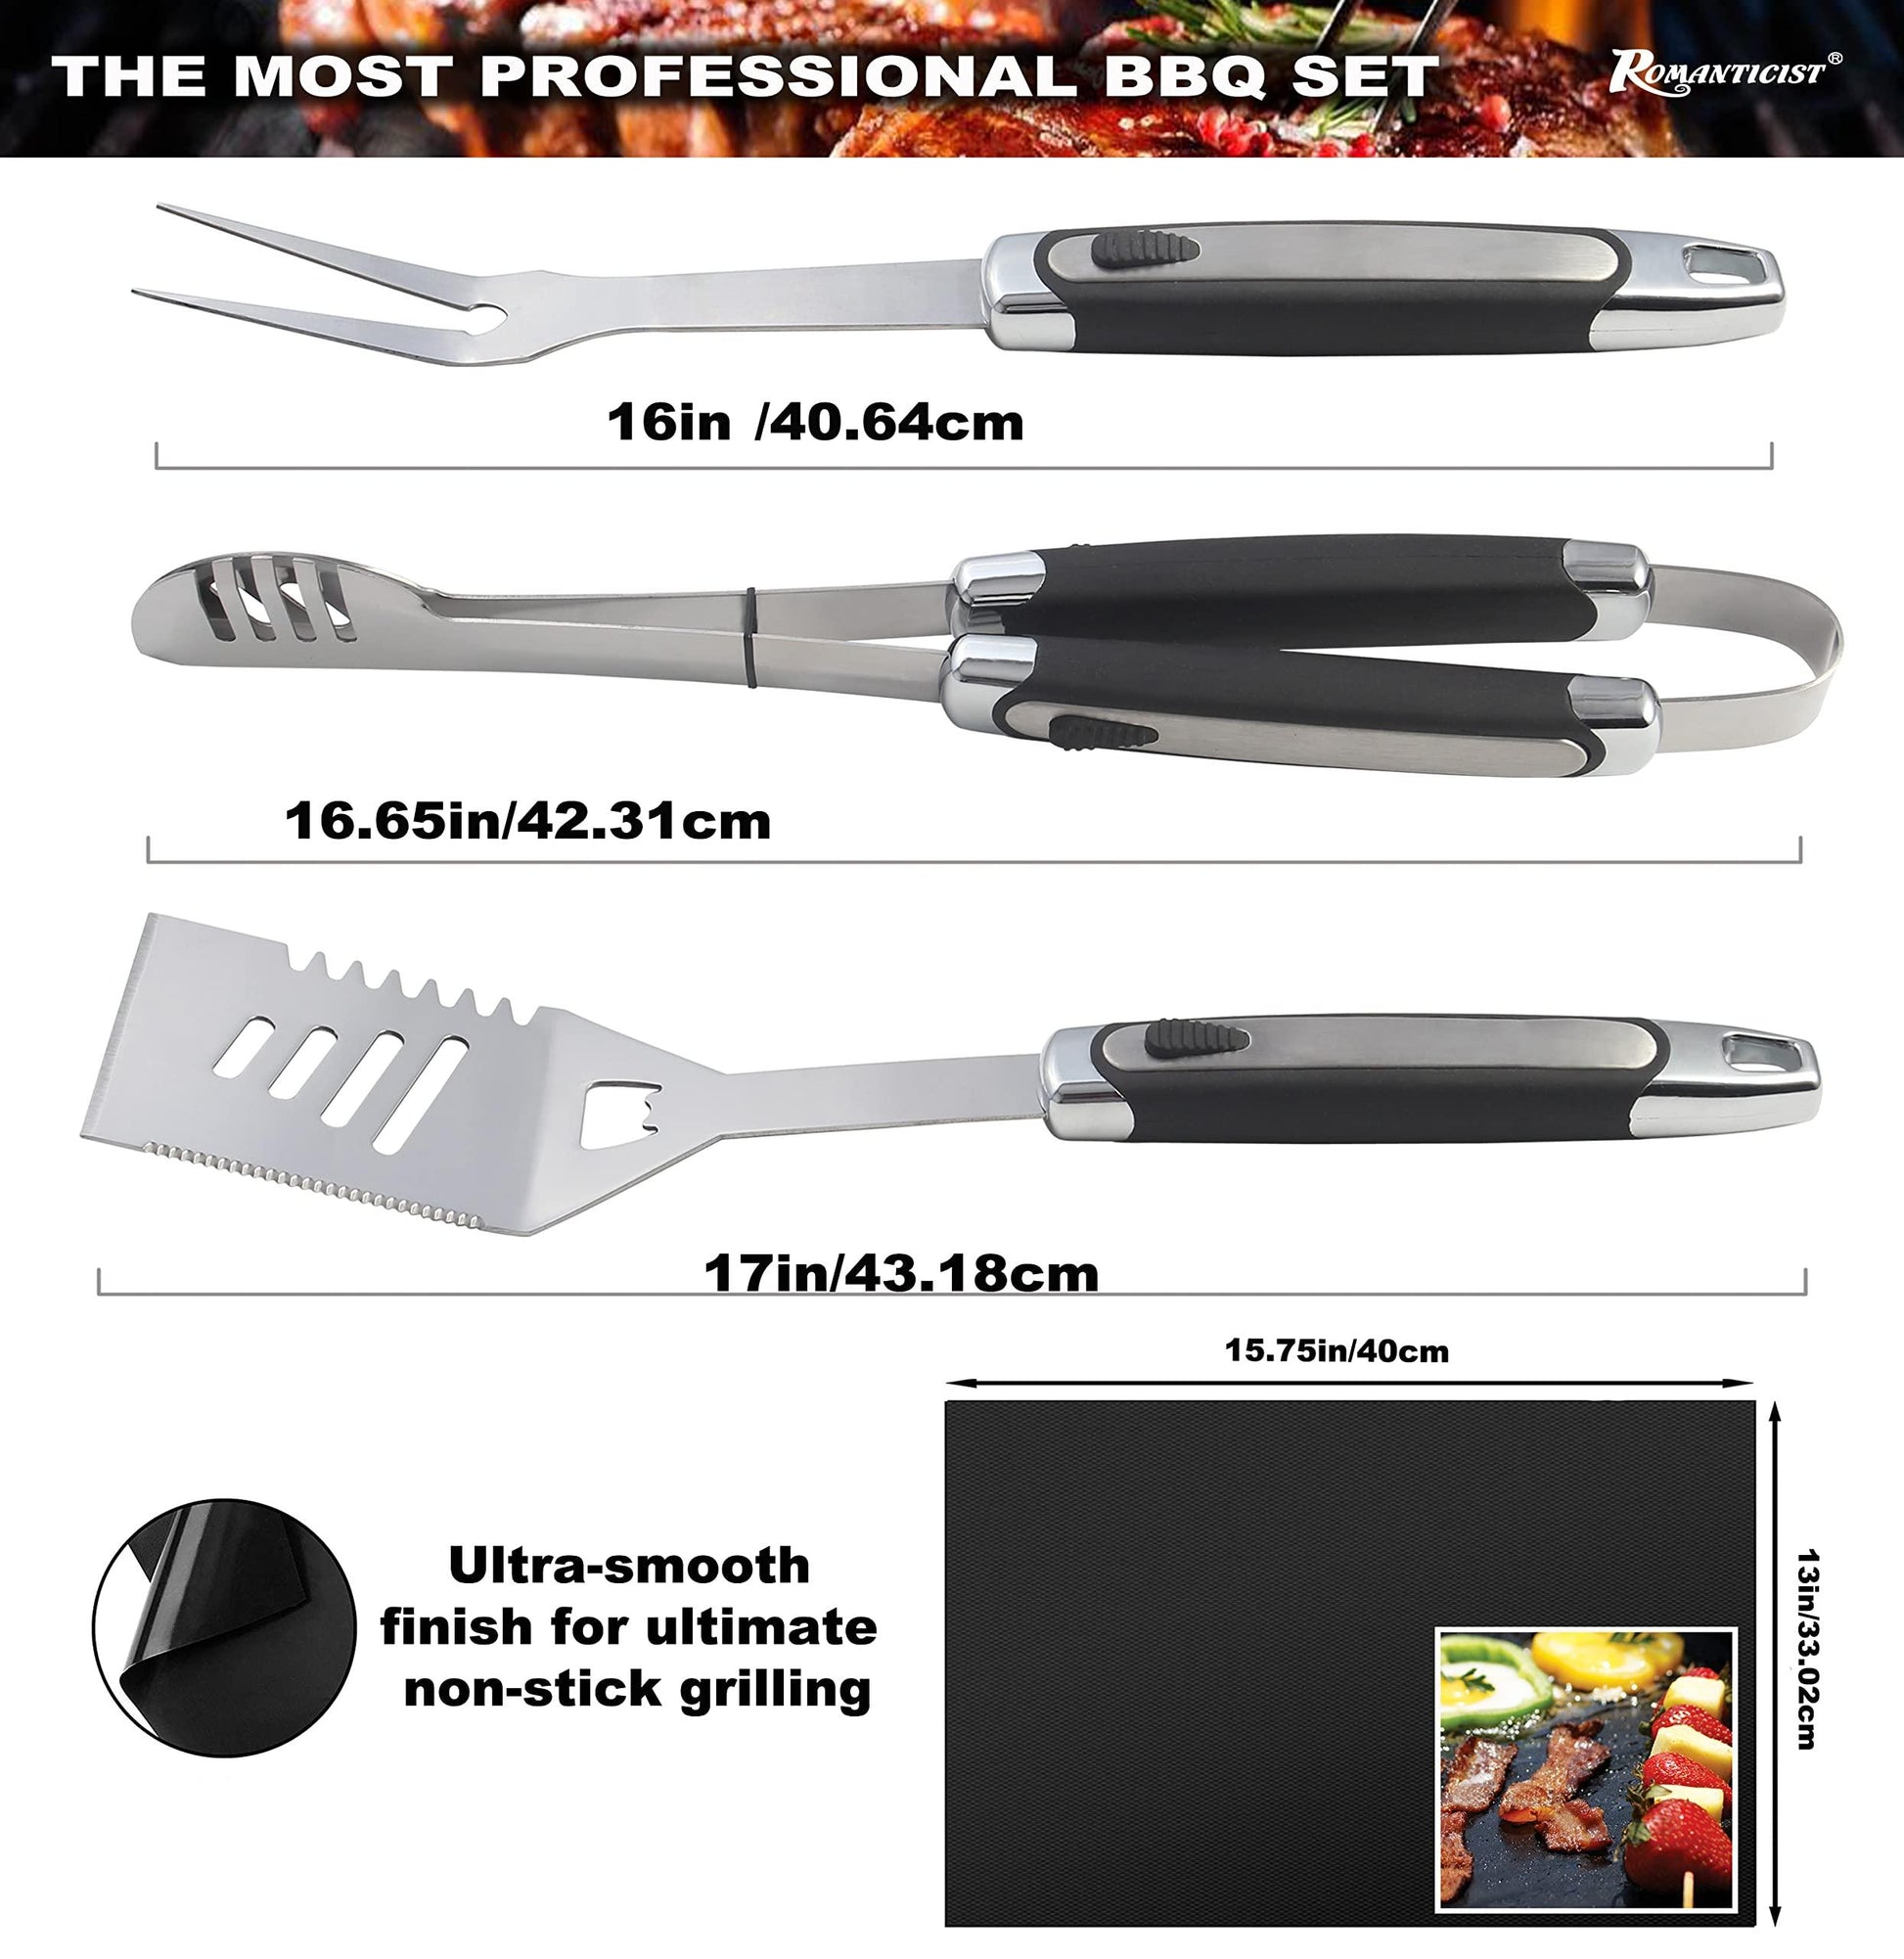 ROMANTICIST 21pc BBQ Grill Accessories Set with Thermometer - The Very Best Grill Gift on Birthday Wedding - Heavy Duty Stainless Steel Grill Utensils with Non-Slip Handle in Aluminum Case - CookCave